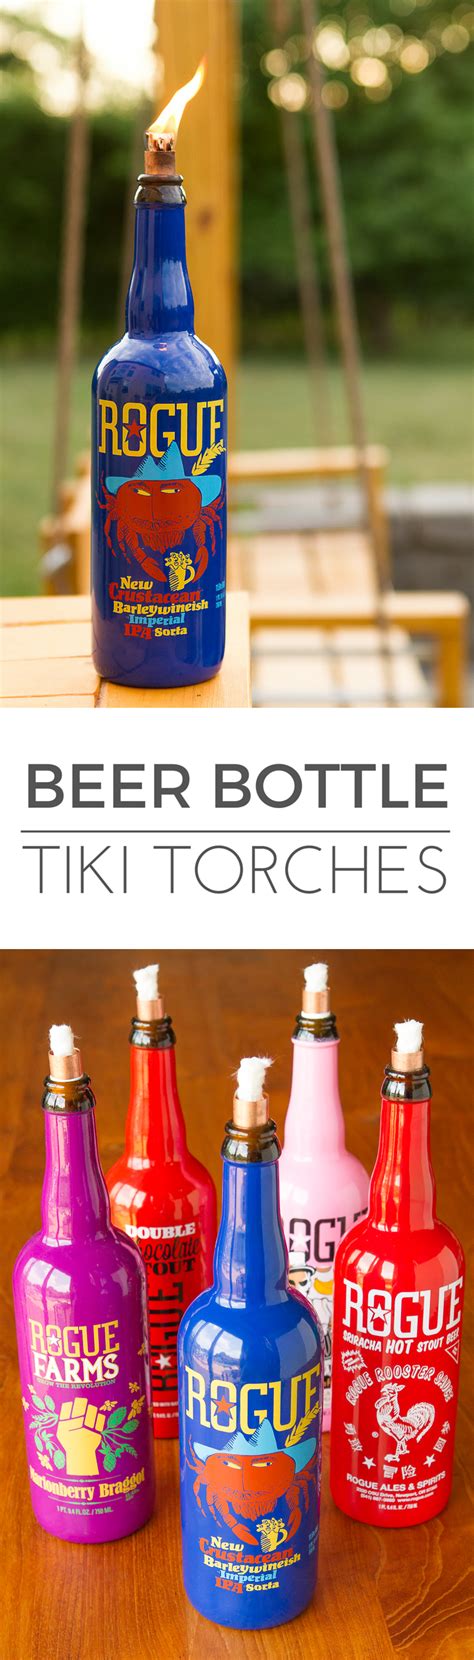 Beer Bottle Tiki Torches Using Colorful Rogue Craft